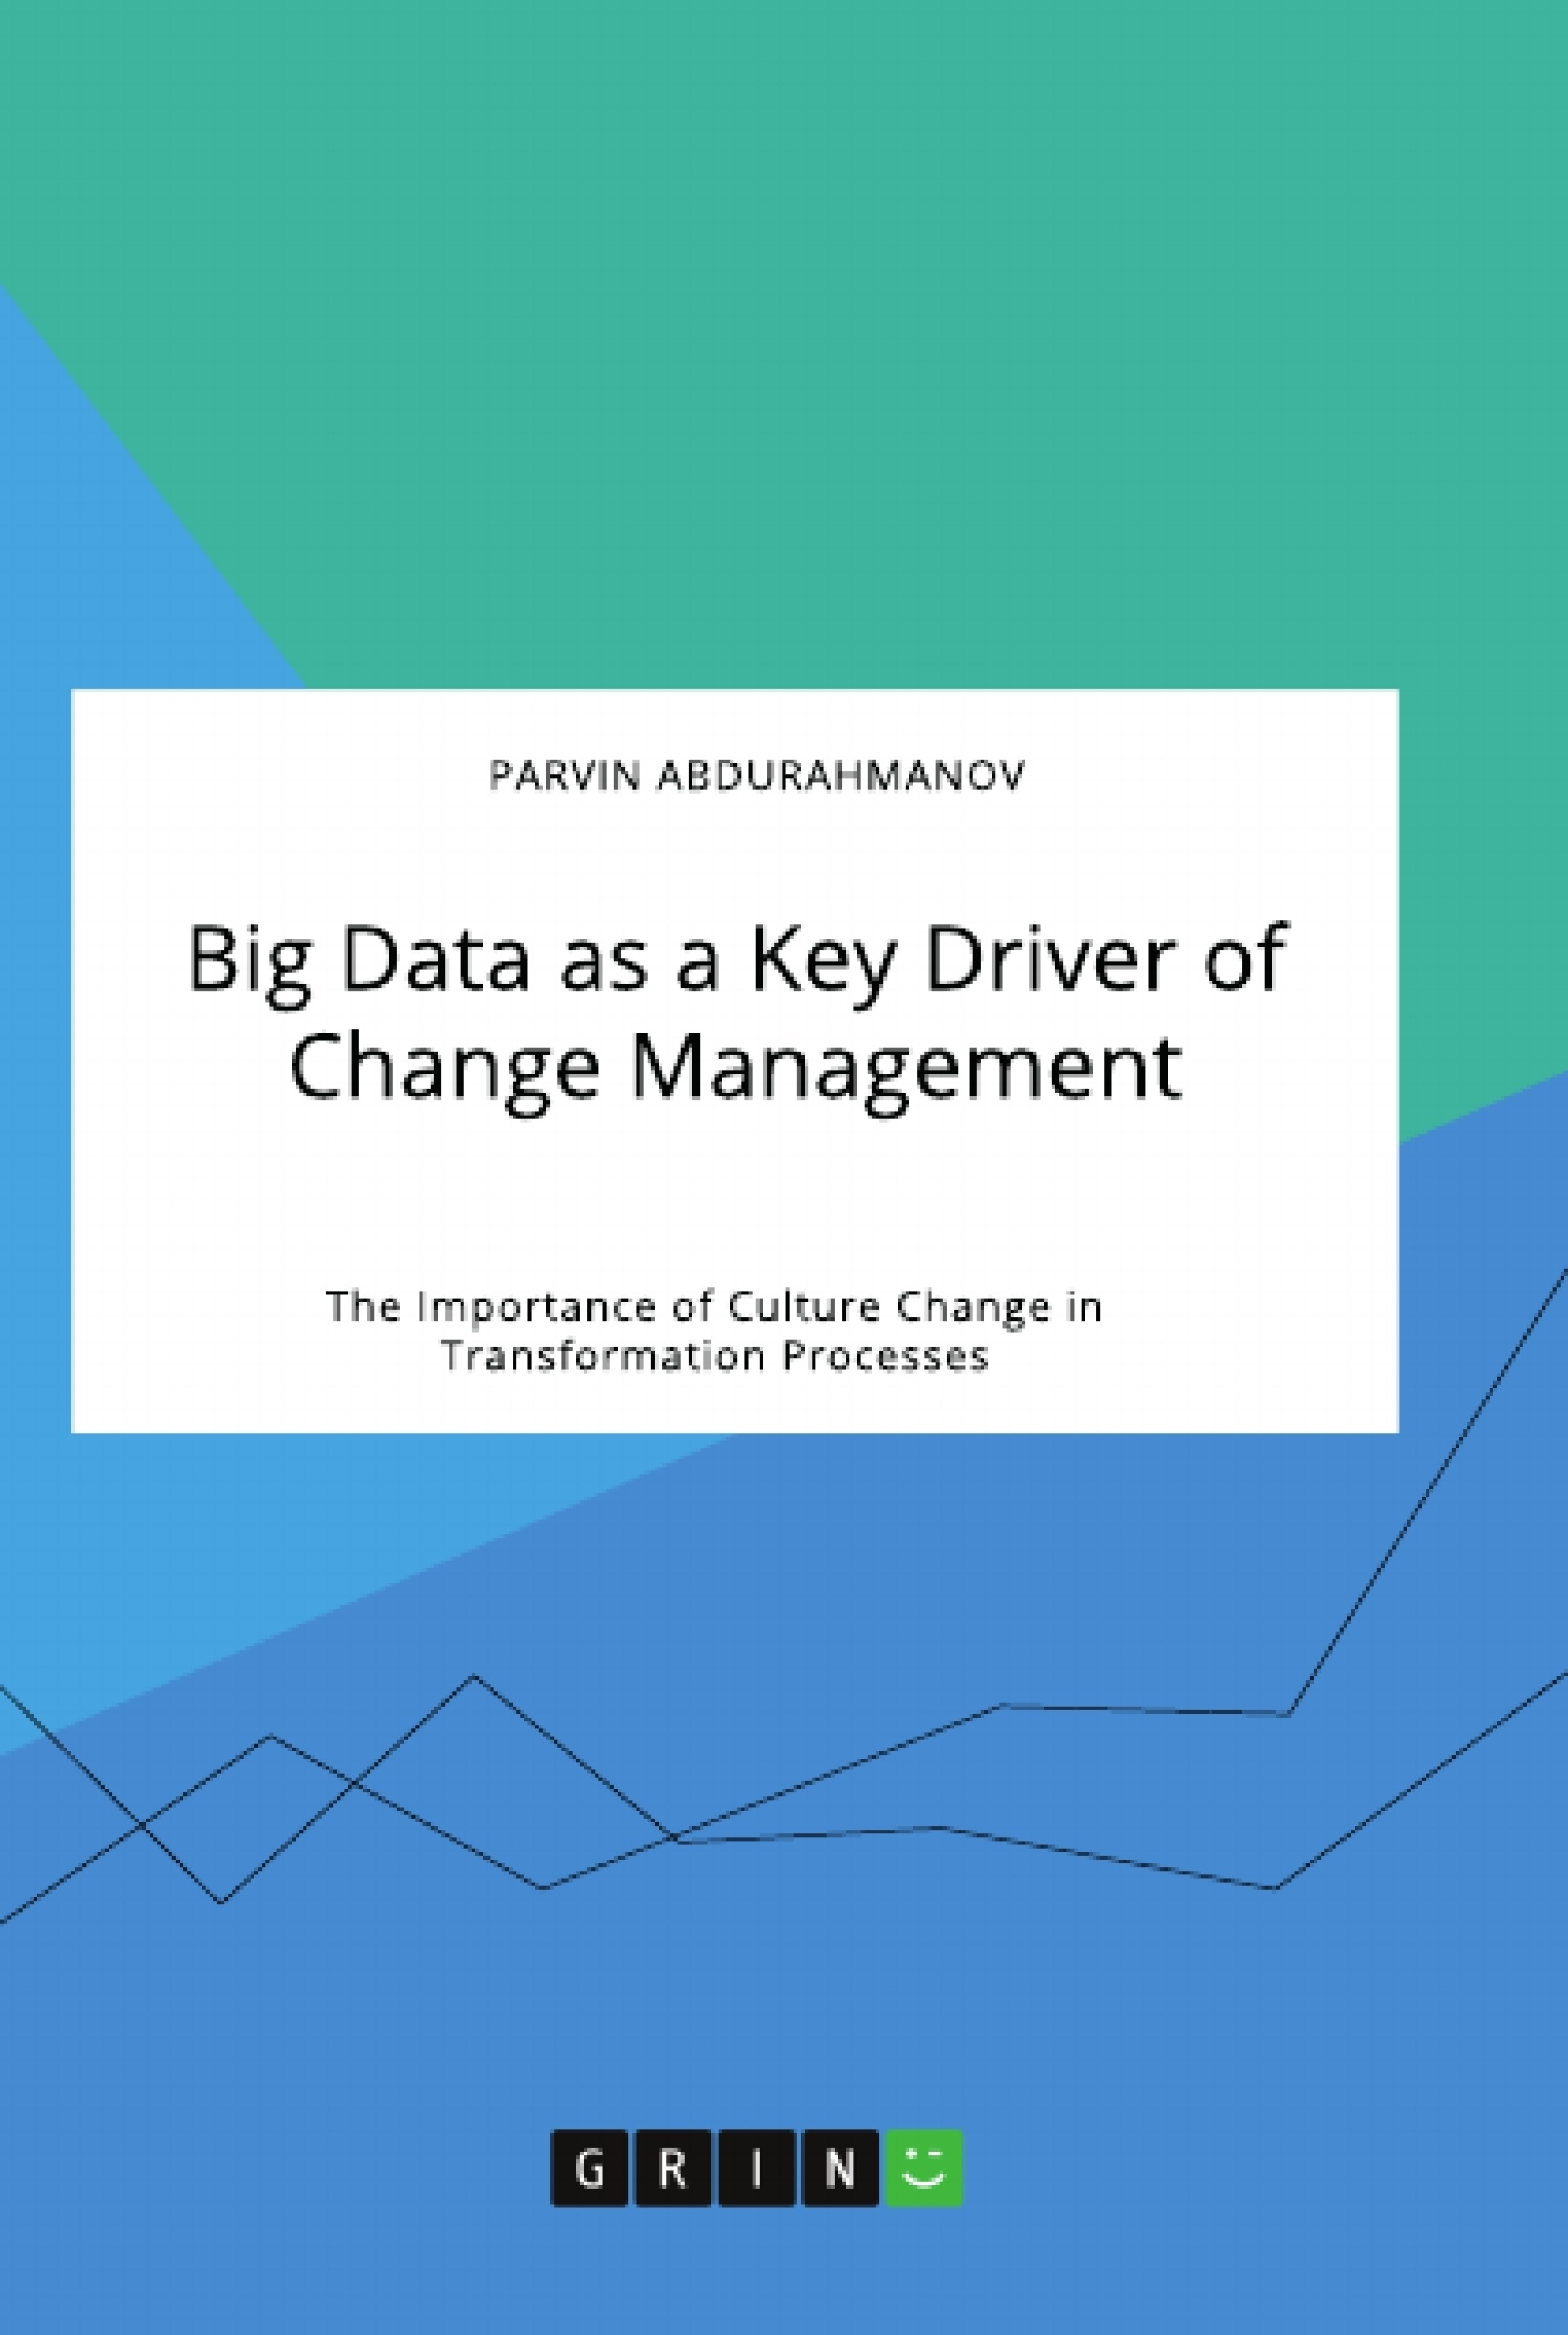 Title: Big Data as a Key Driver of Change Management. The Importance of Culture Change in Transformation Processes